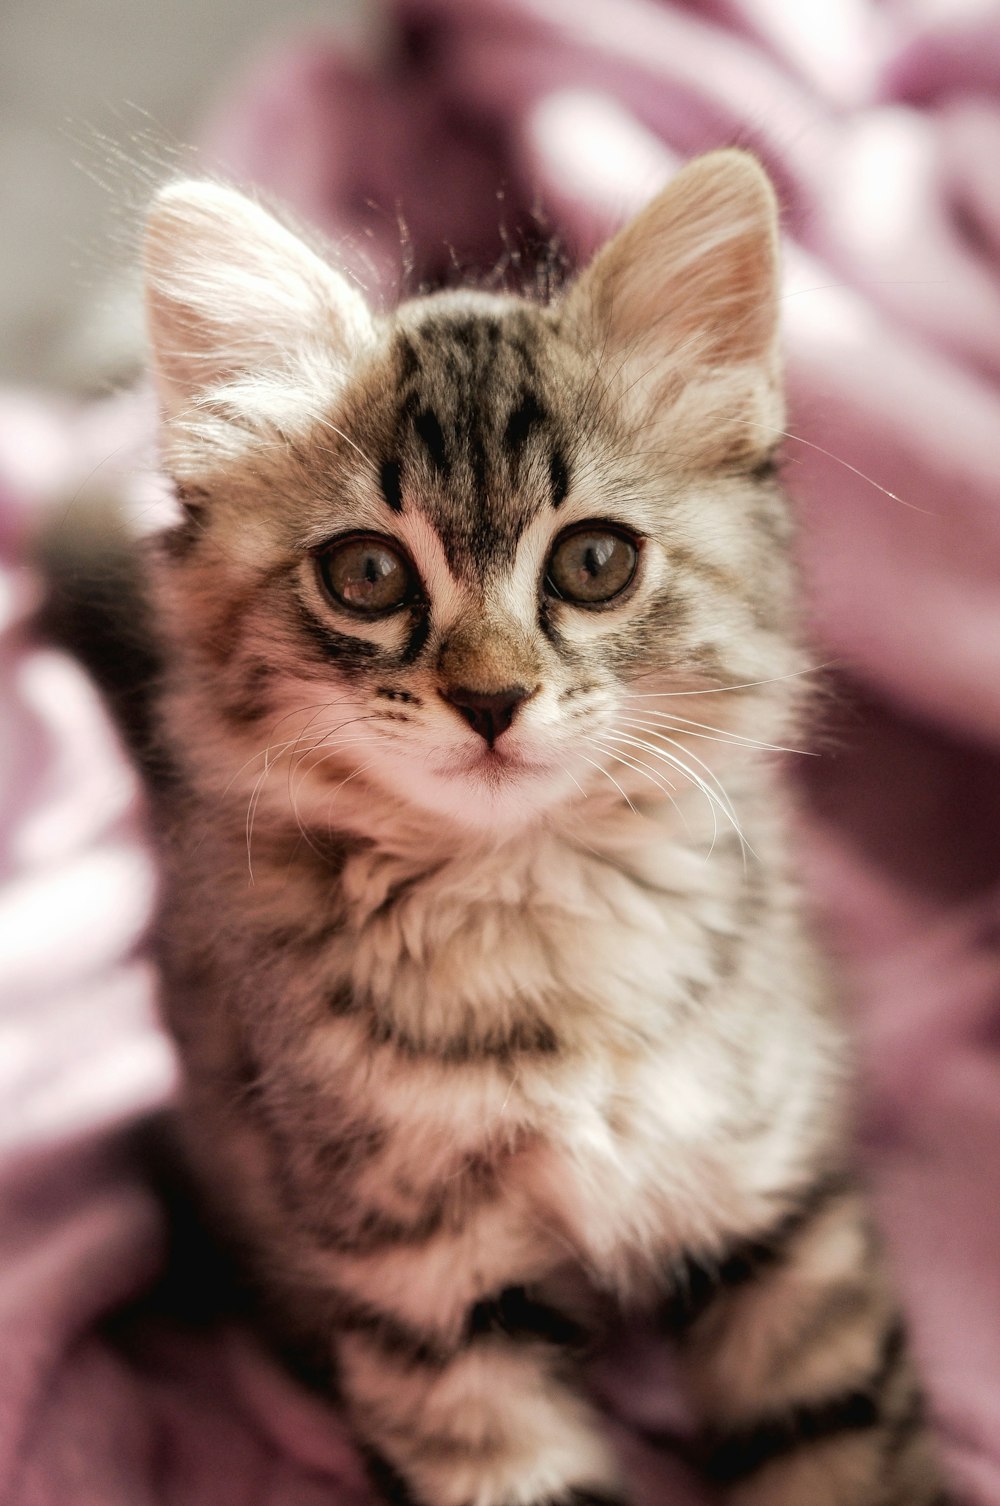 “Amazing Full 4K Collection of Over 999 Cute Kitten Pictures”